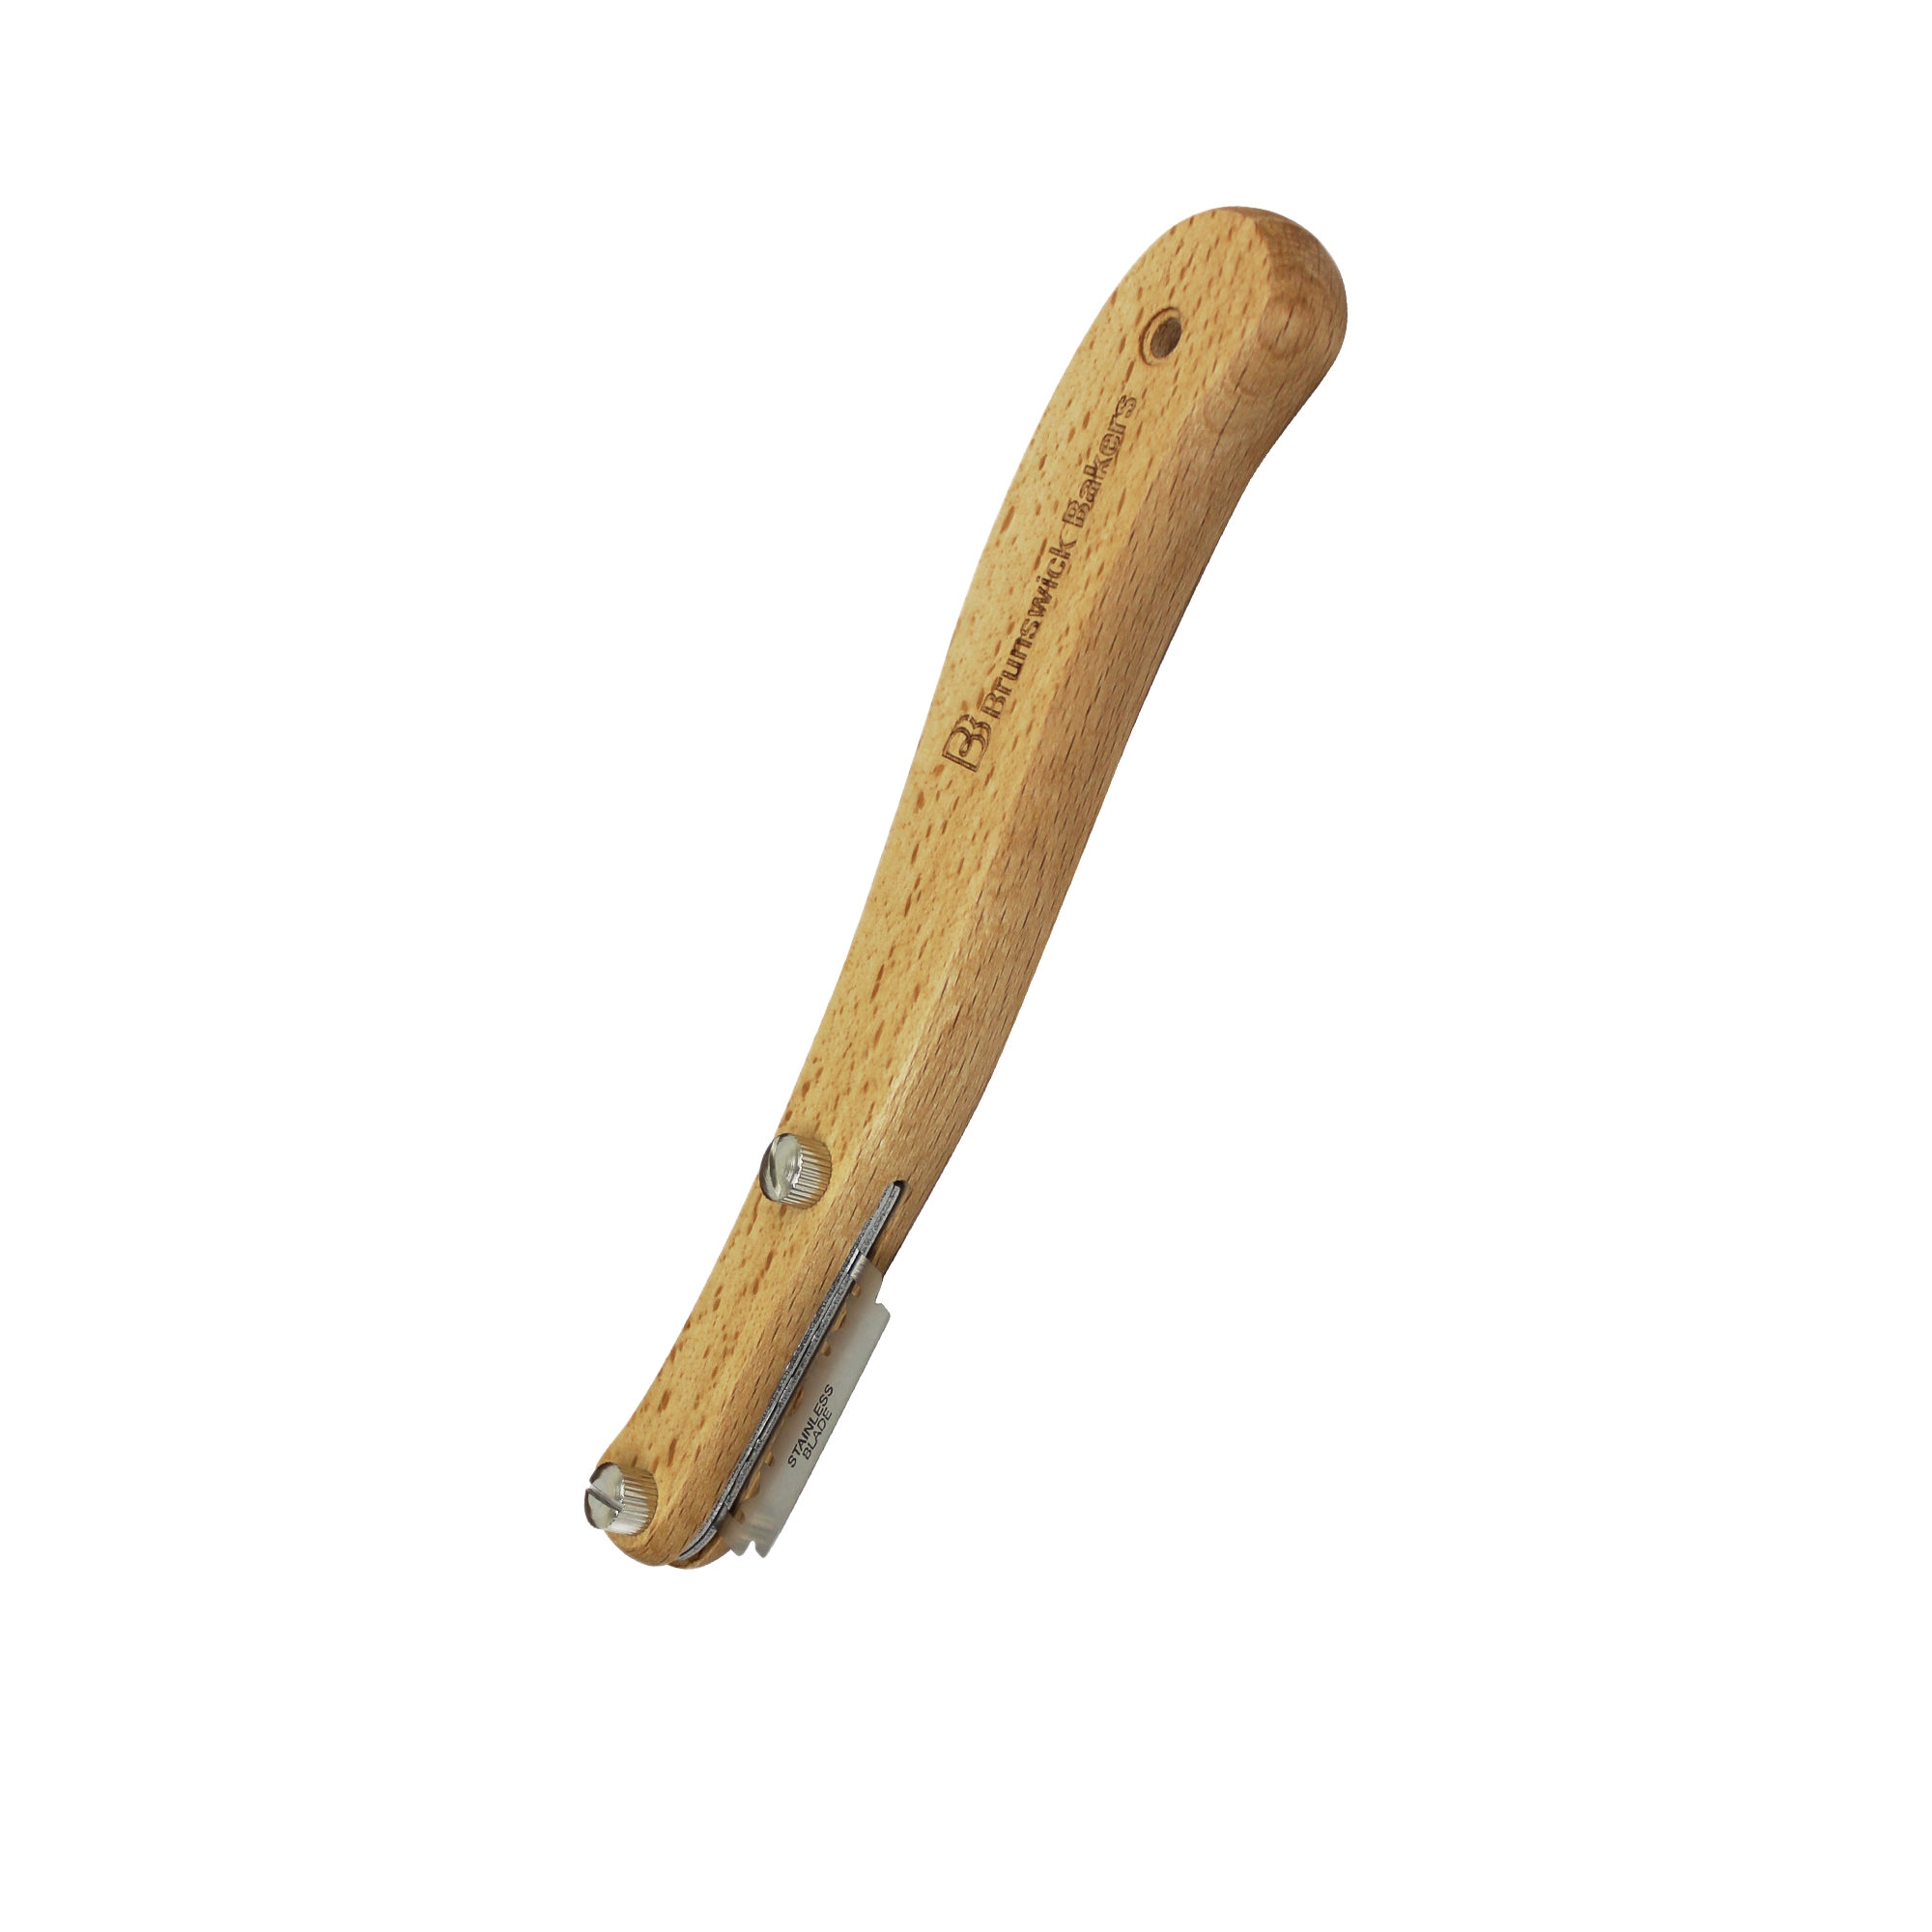 Brunswick Bakers Lame Beech Handle 19cm with Replacement Blades Image 1